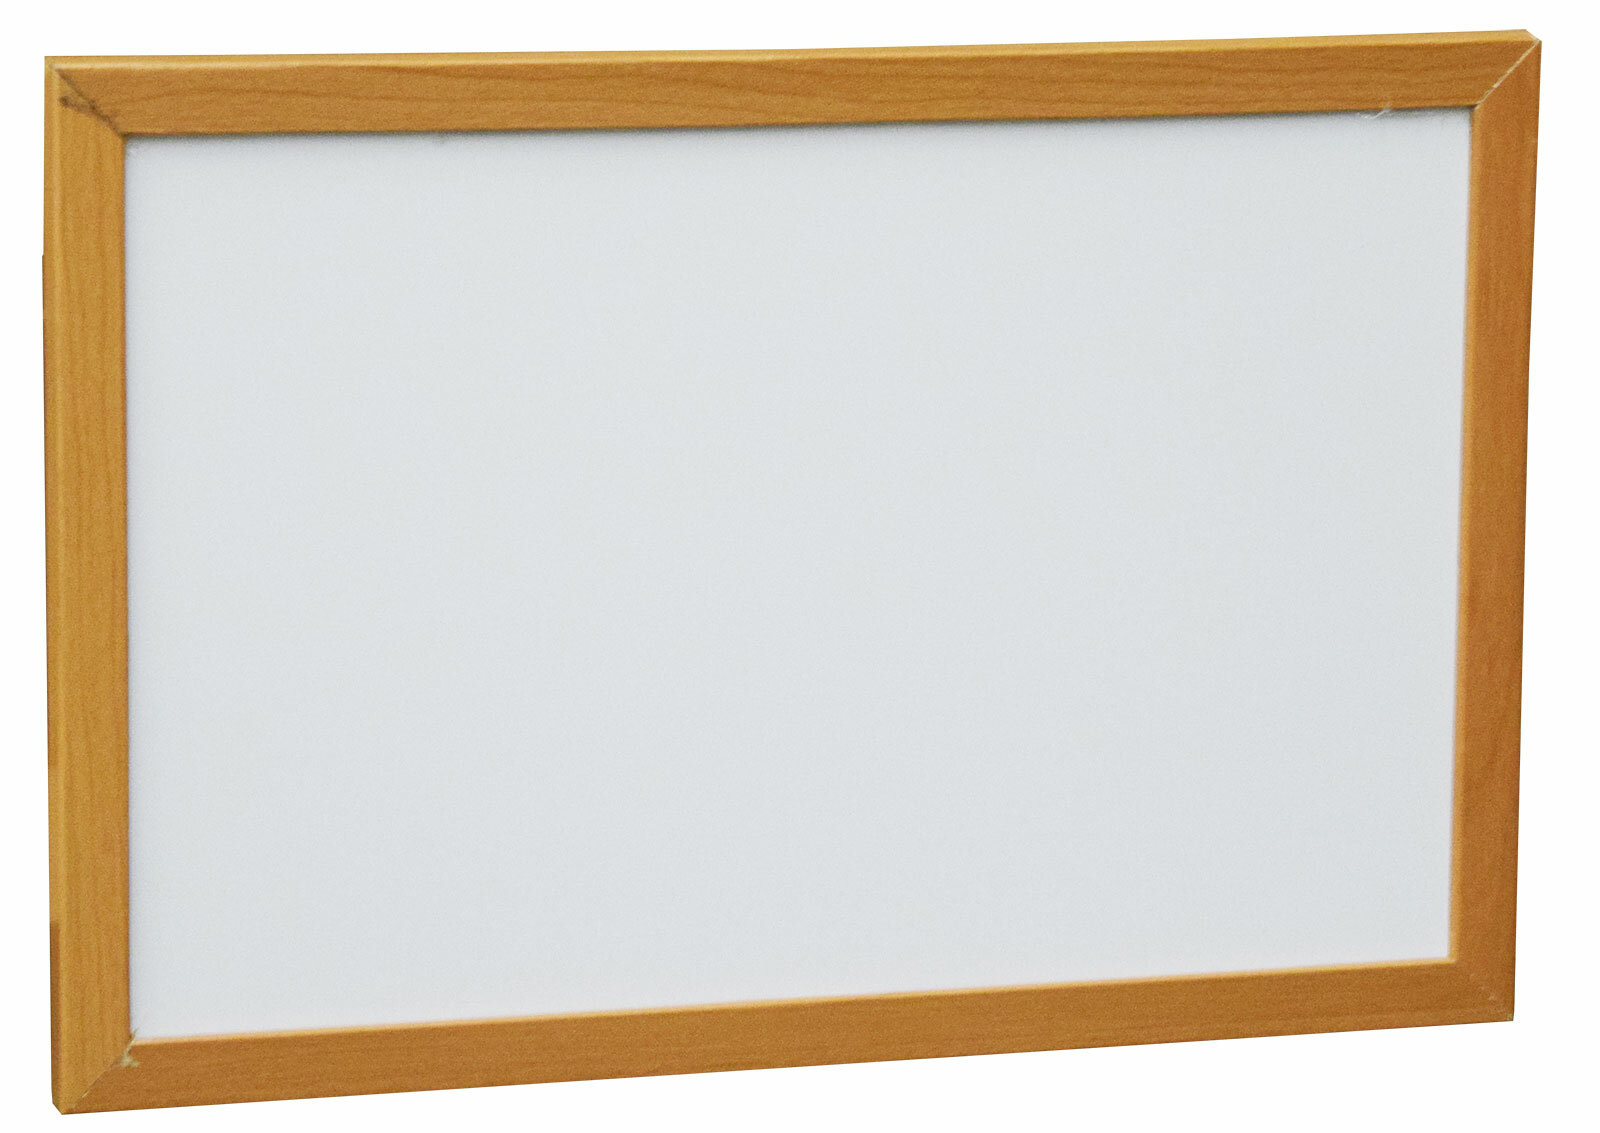 Neoplex 48" x 60" Wood Framed Magnetic Dry Erase Sign Whiteboard White board 